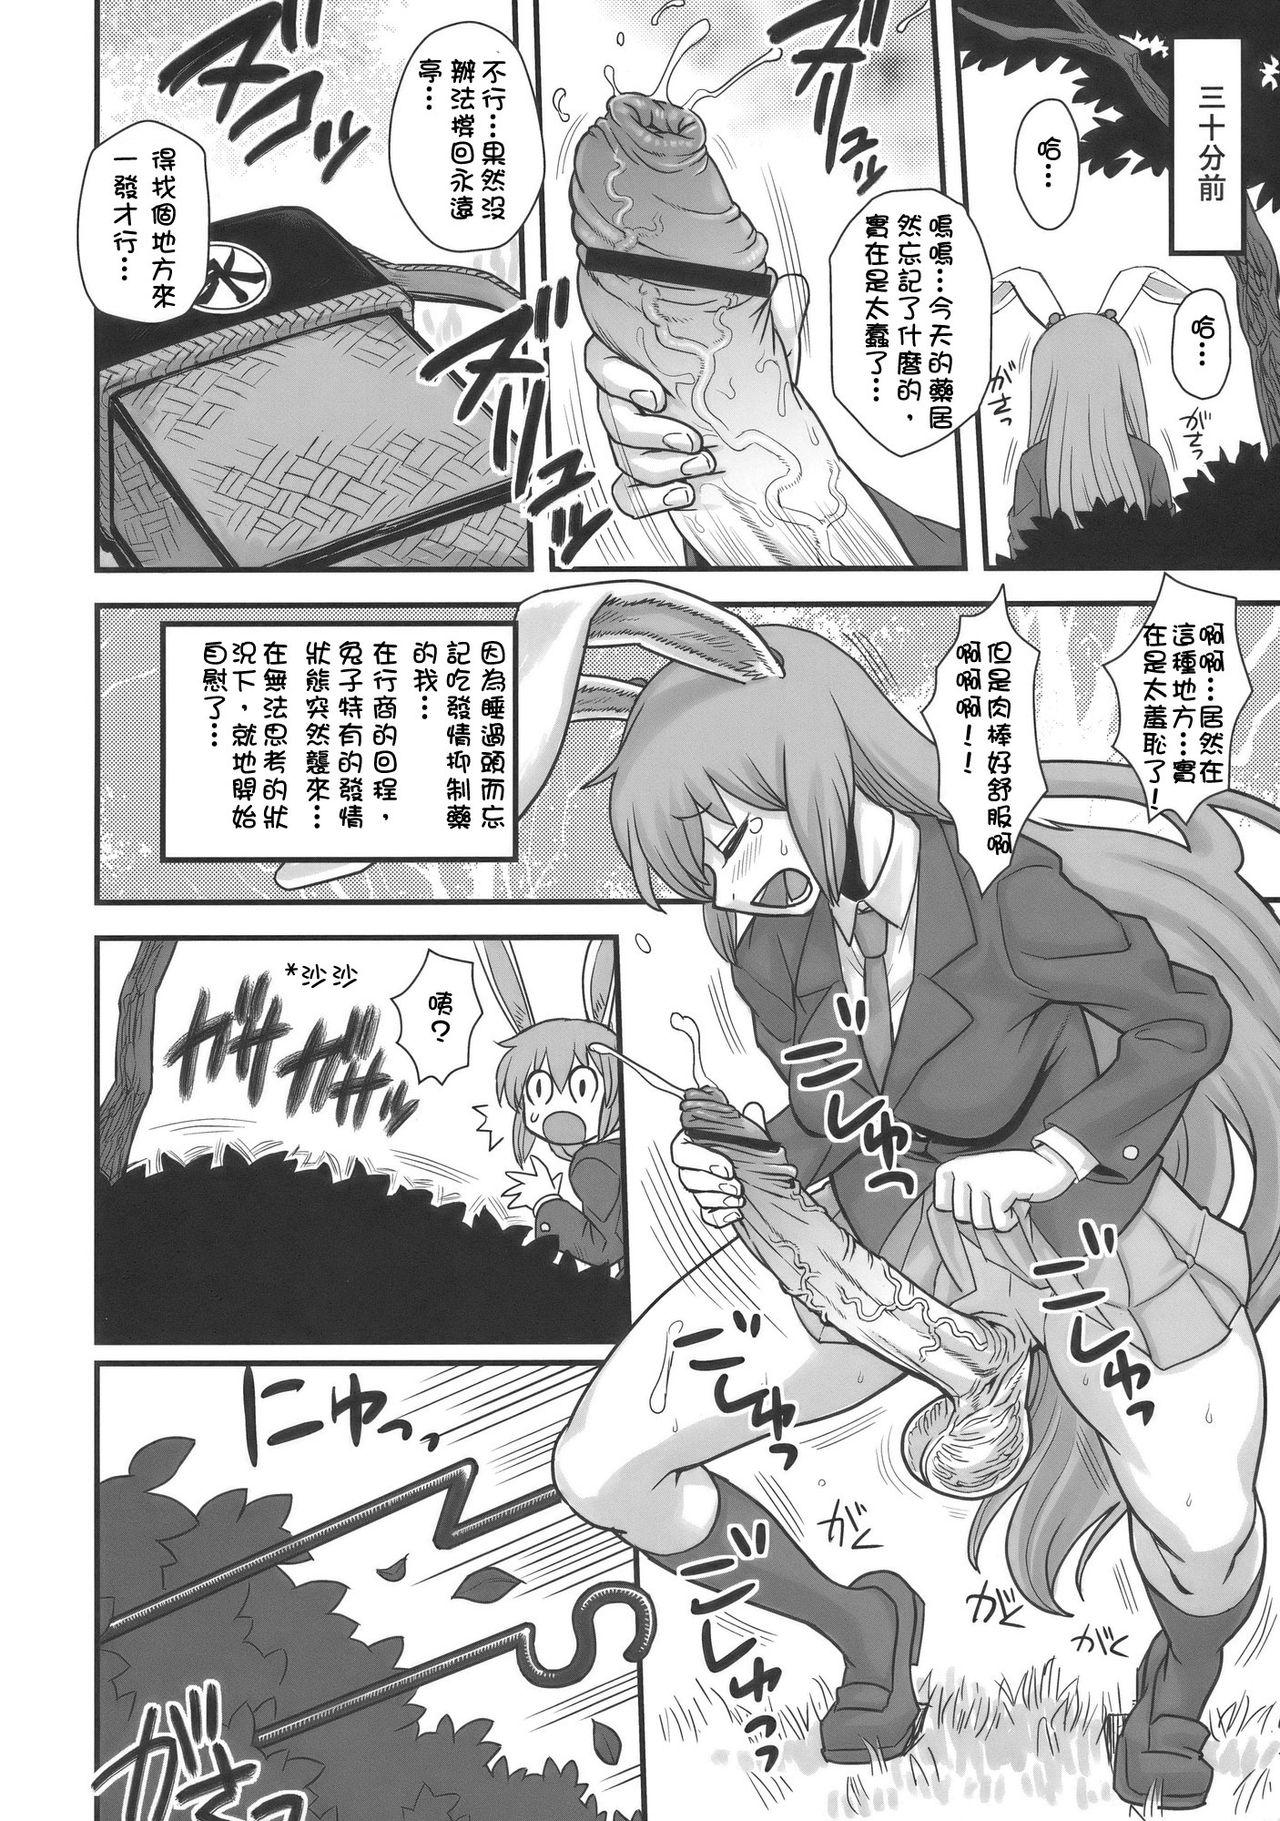 Behind Lunatic Udon - Touhou project Gay Skinny - Page 4